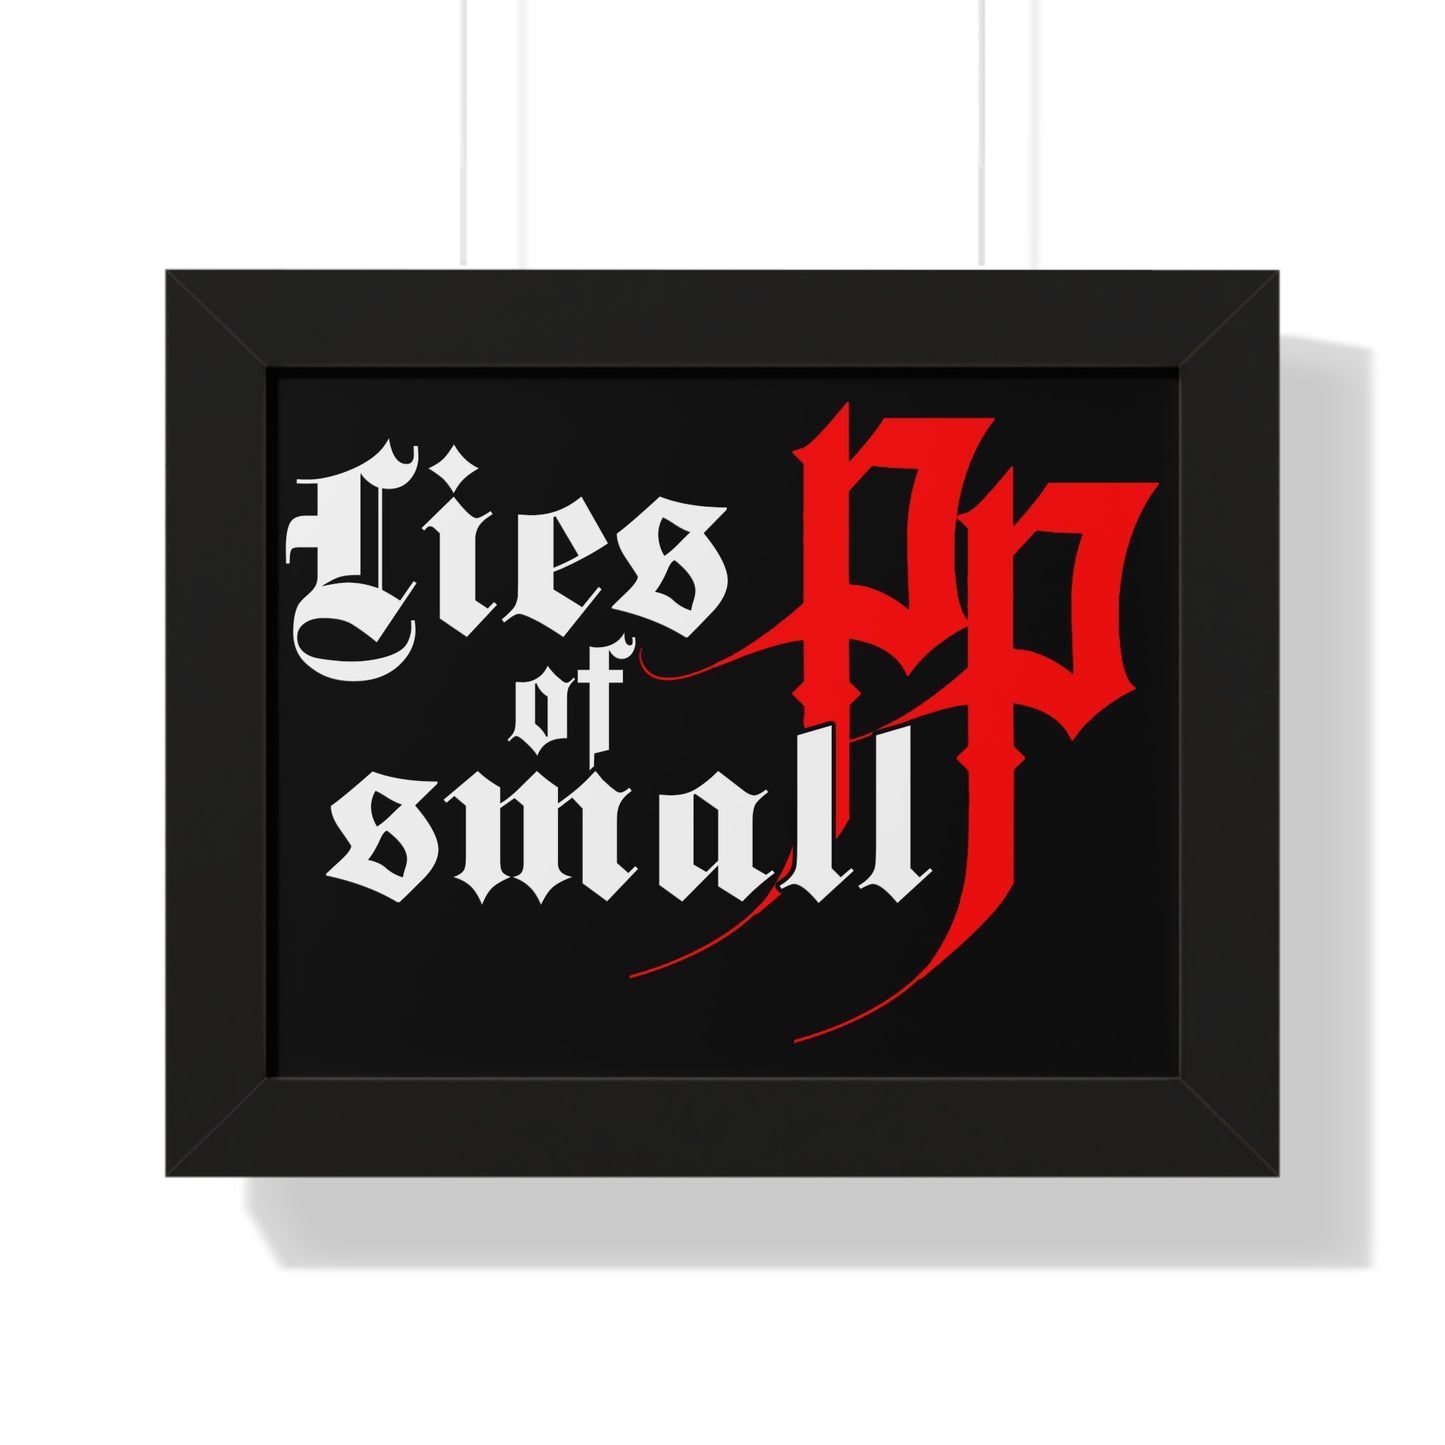 Lies of P Framed Poster - Lies of Small PP